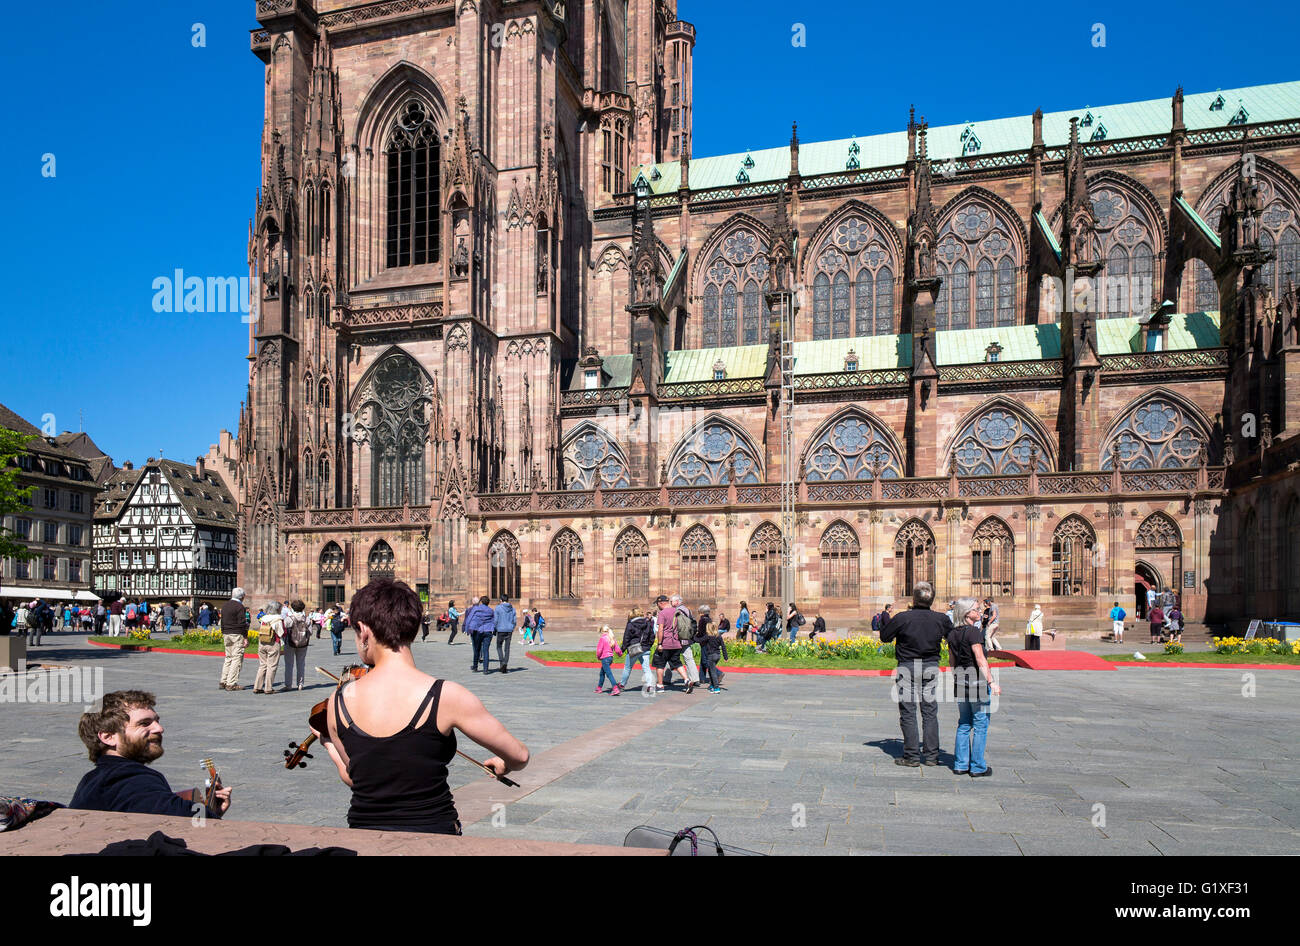 Female violonist, Place du Château square and Notre-Dame cathedral 14th century, Strasbourg, Alsace, France, Europe Stock Photo